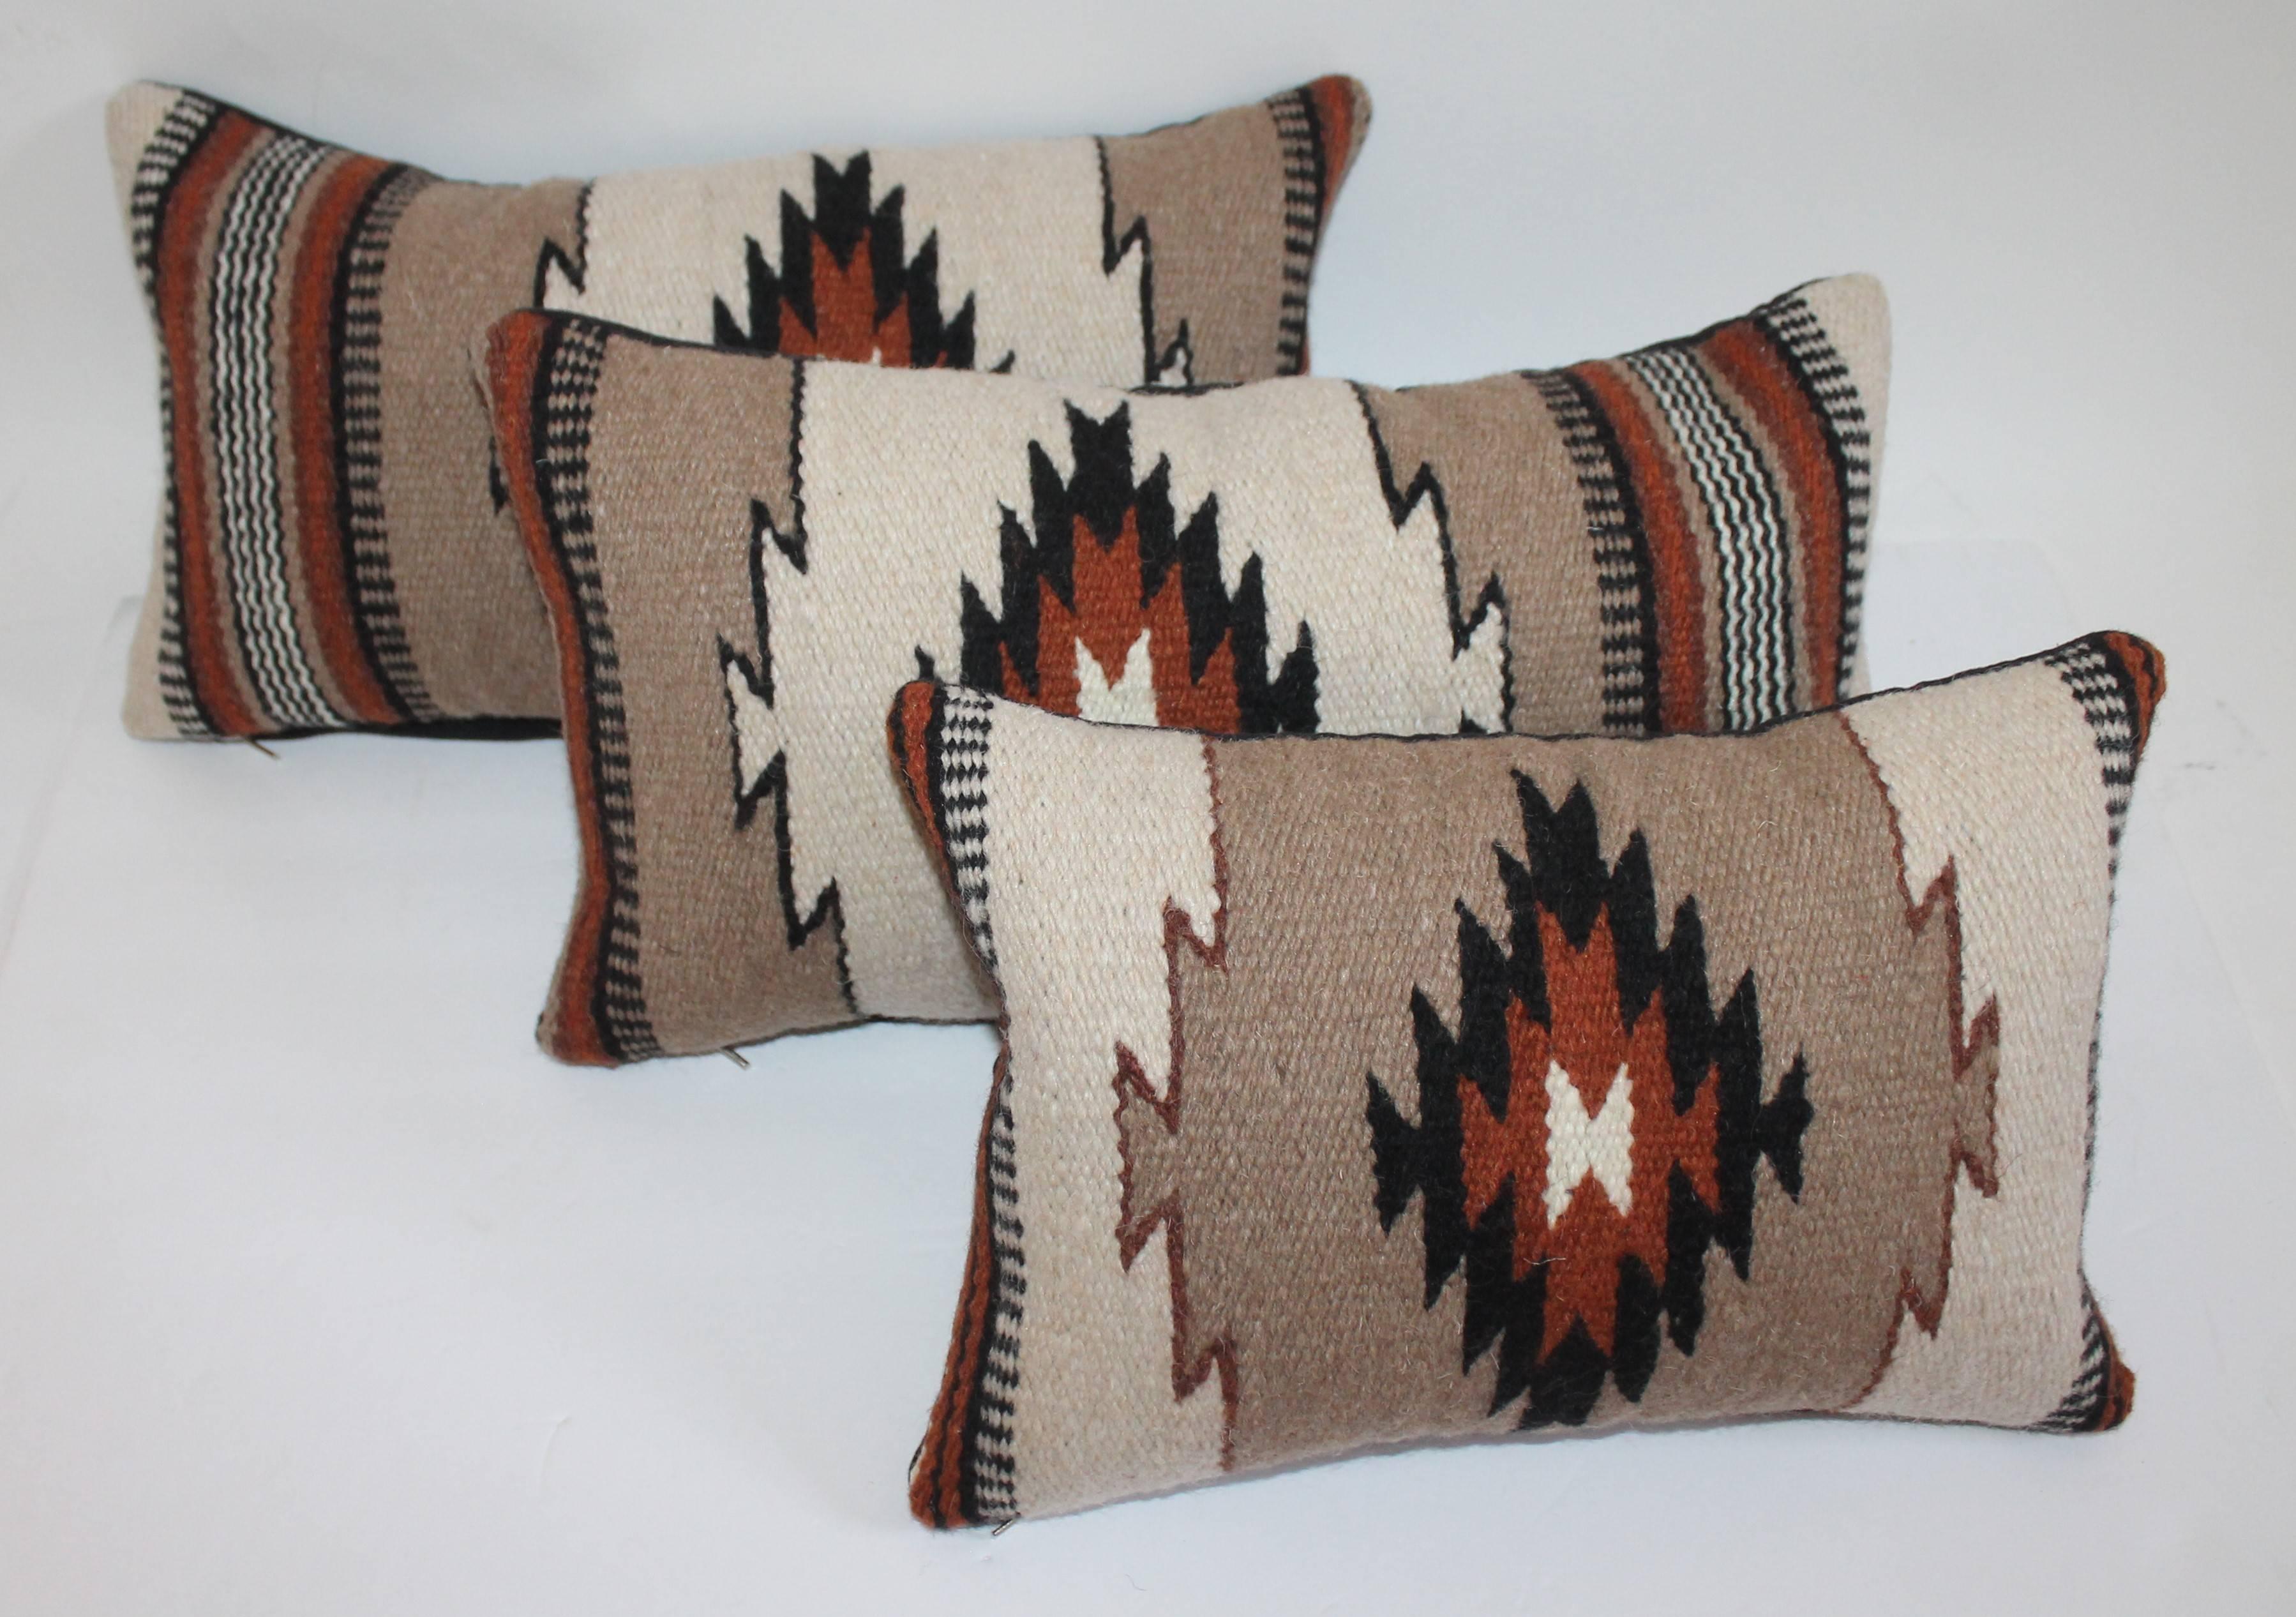 These fine late but great weaving pillows are in pristine condition. Sold as a group of three.